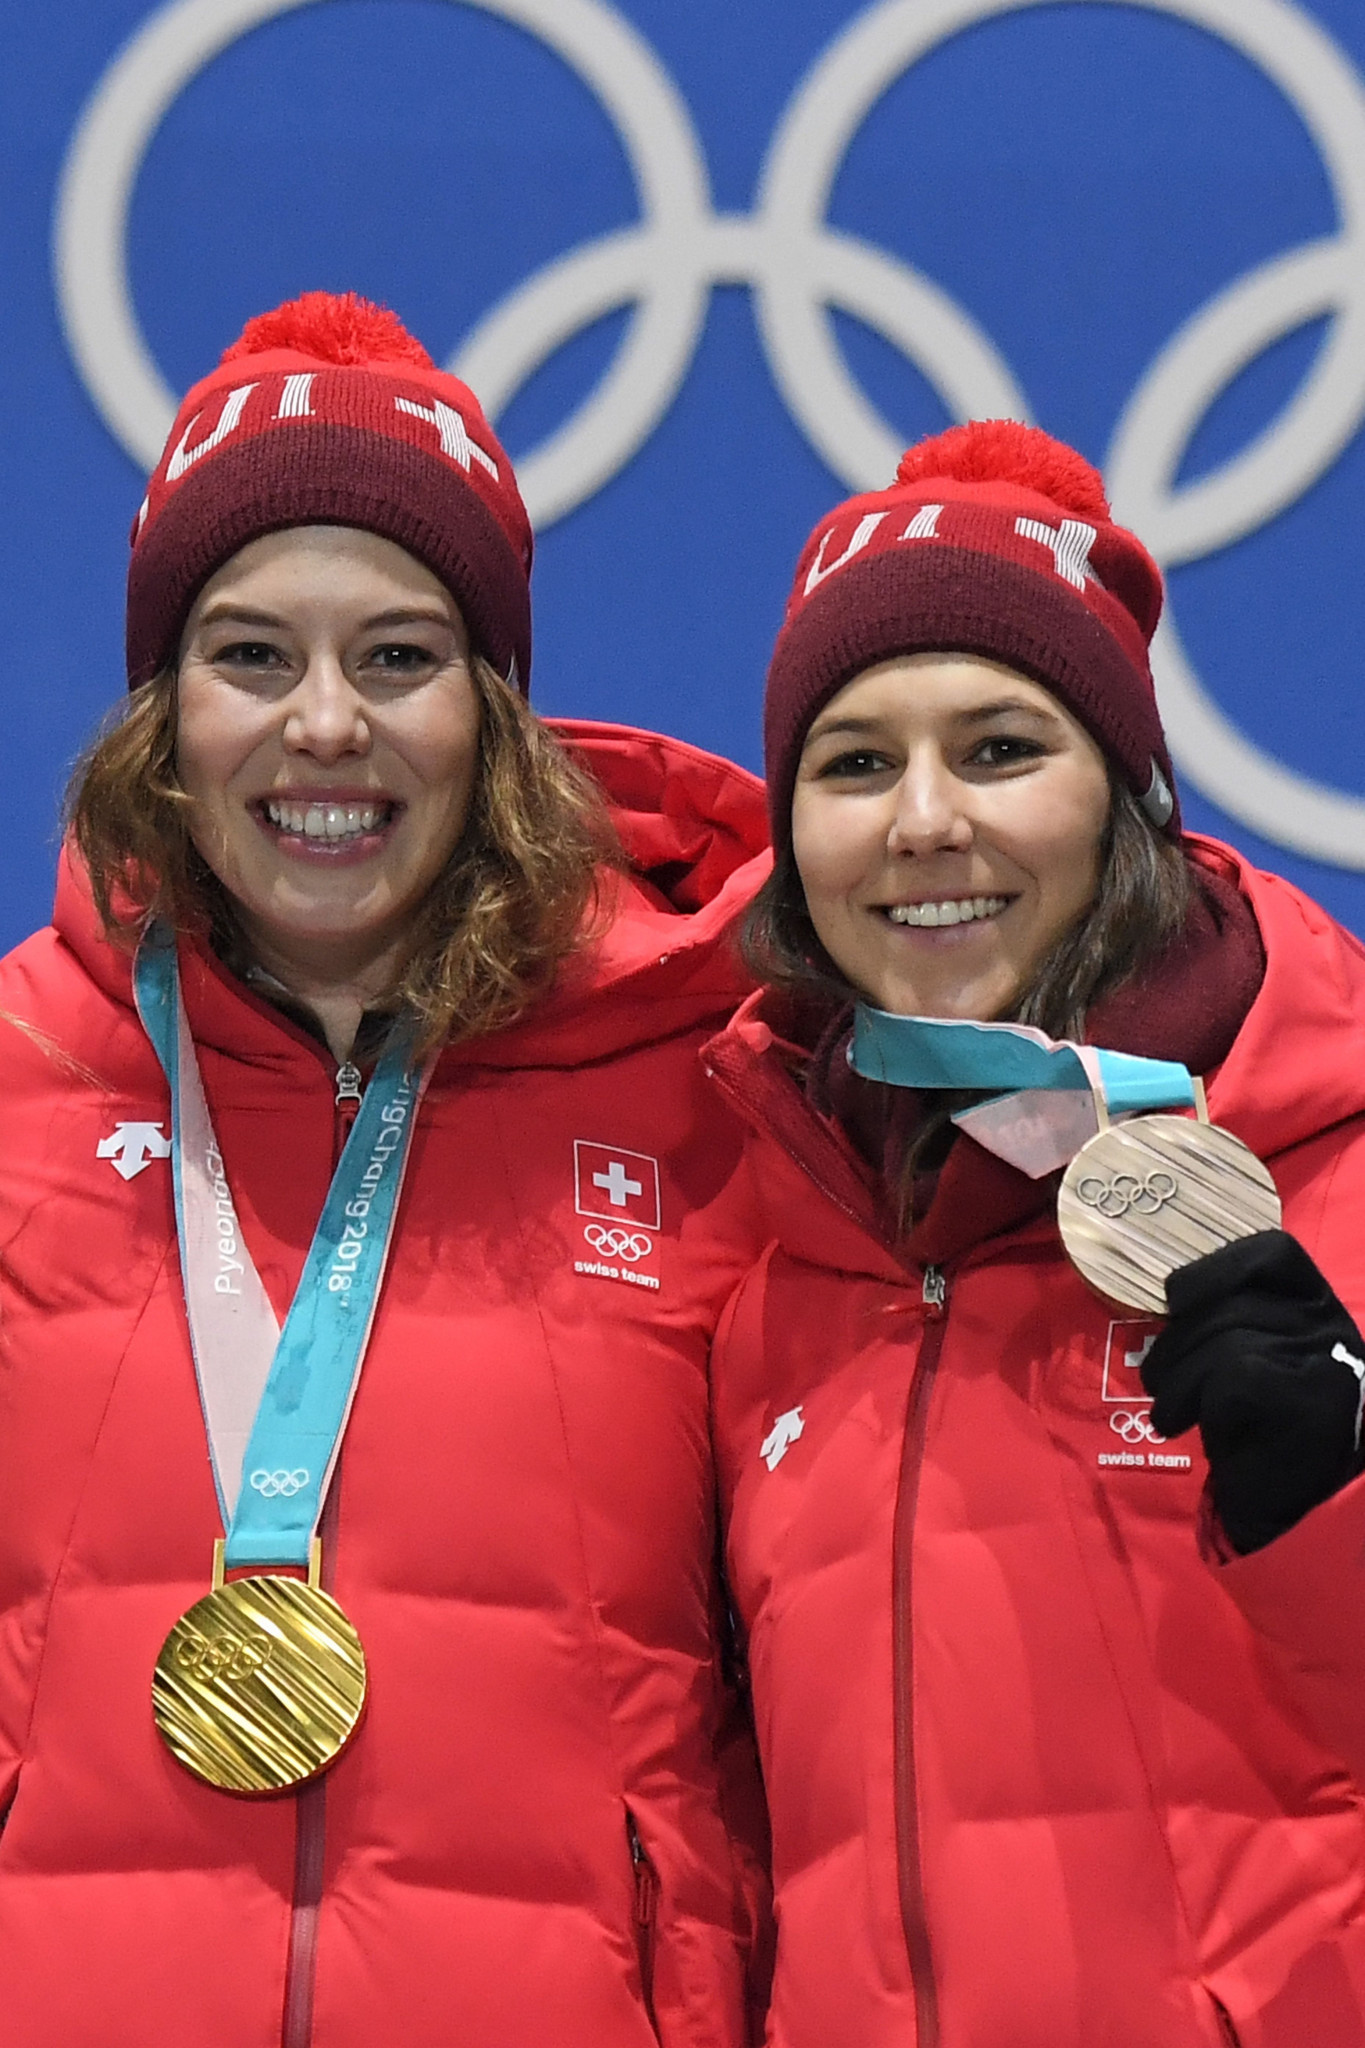 Switzerland's gold and bronze medallists in the Pyeongchang Alpine skiing Combined events, Michelle Gisin and Wendy Holdener, will be back on home snow for this weekend's FIS World Cup event at Crans-Montana ©Getty Images